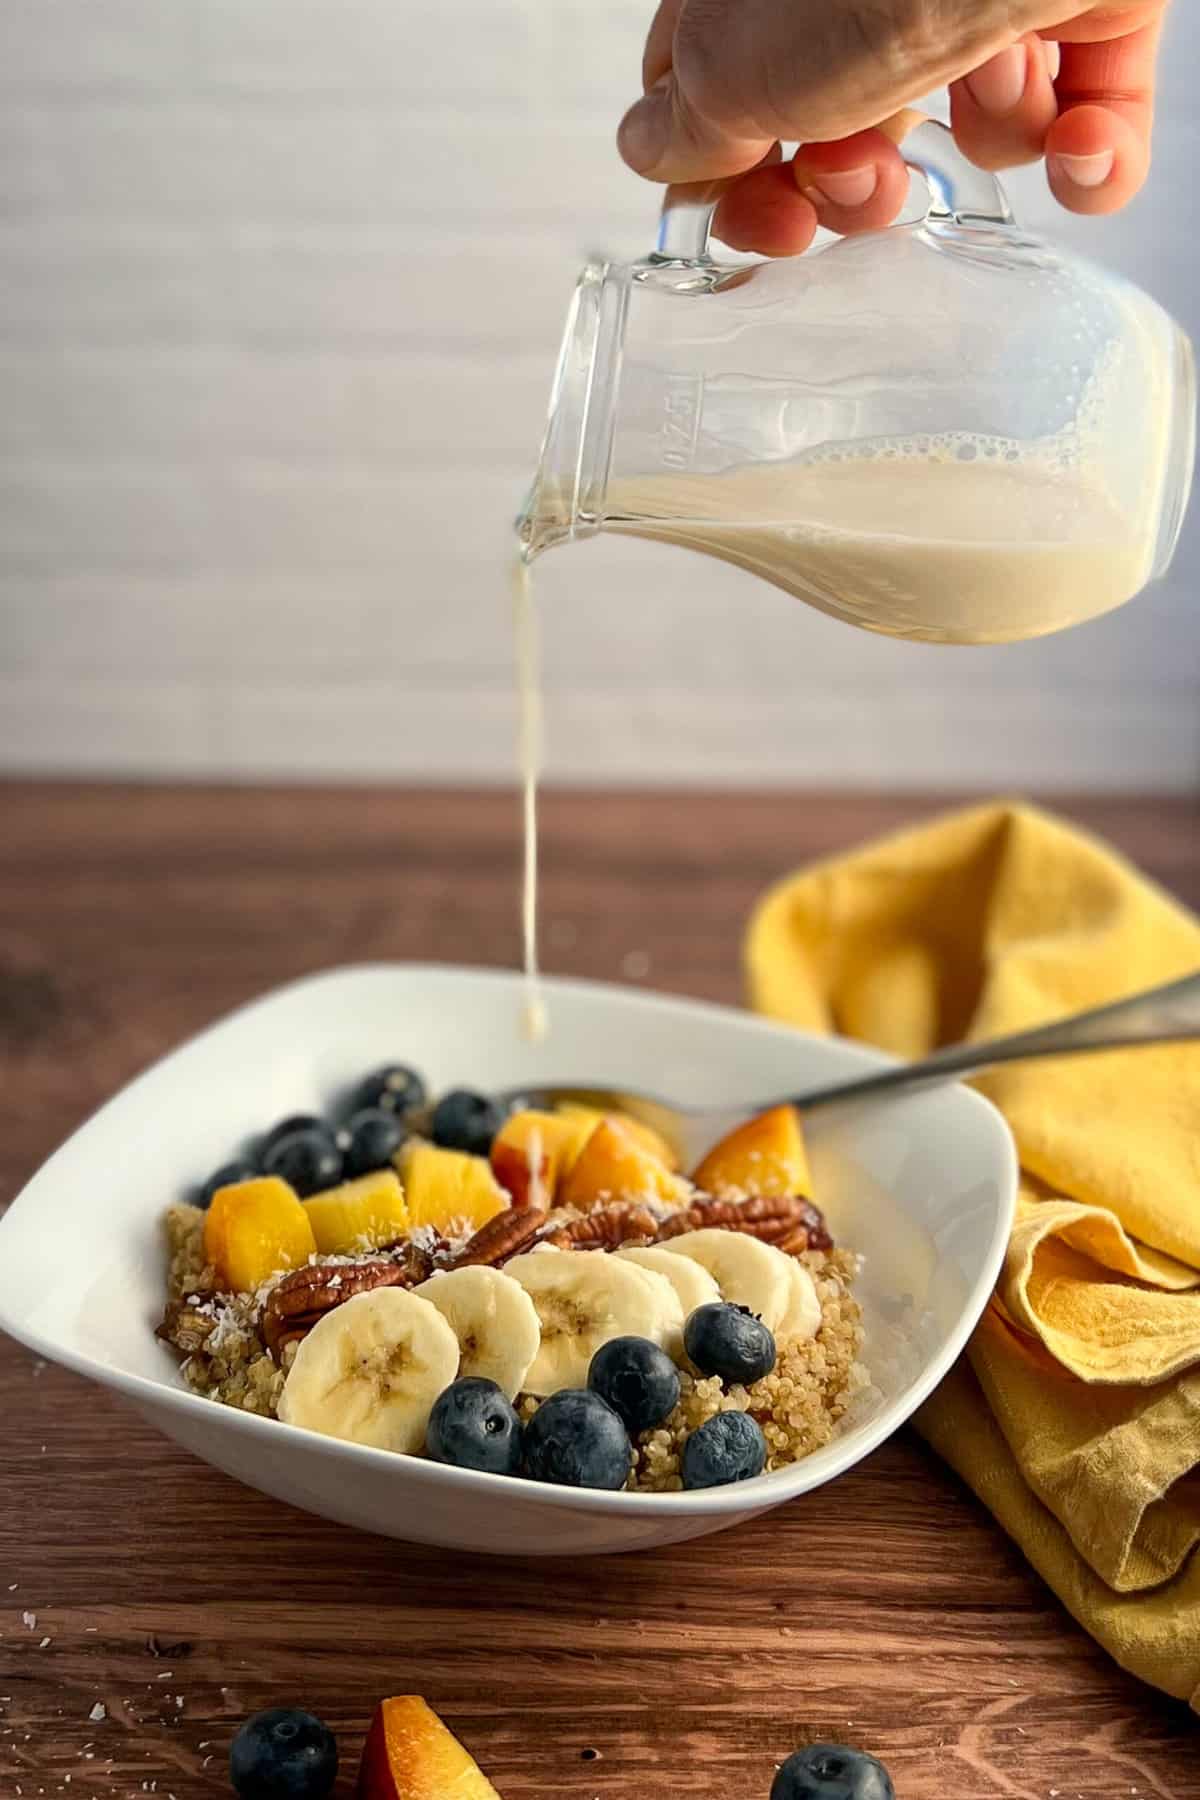 side view of vegan quinoa breakfast bowl in a square white ceramic bowl with a spoon and napkin blurred on the side. a woman's hand is holding a small glass pitcher of plant based milk being poured into the bowl.